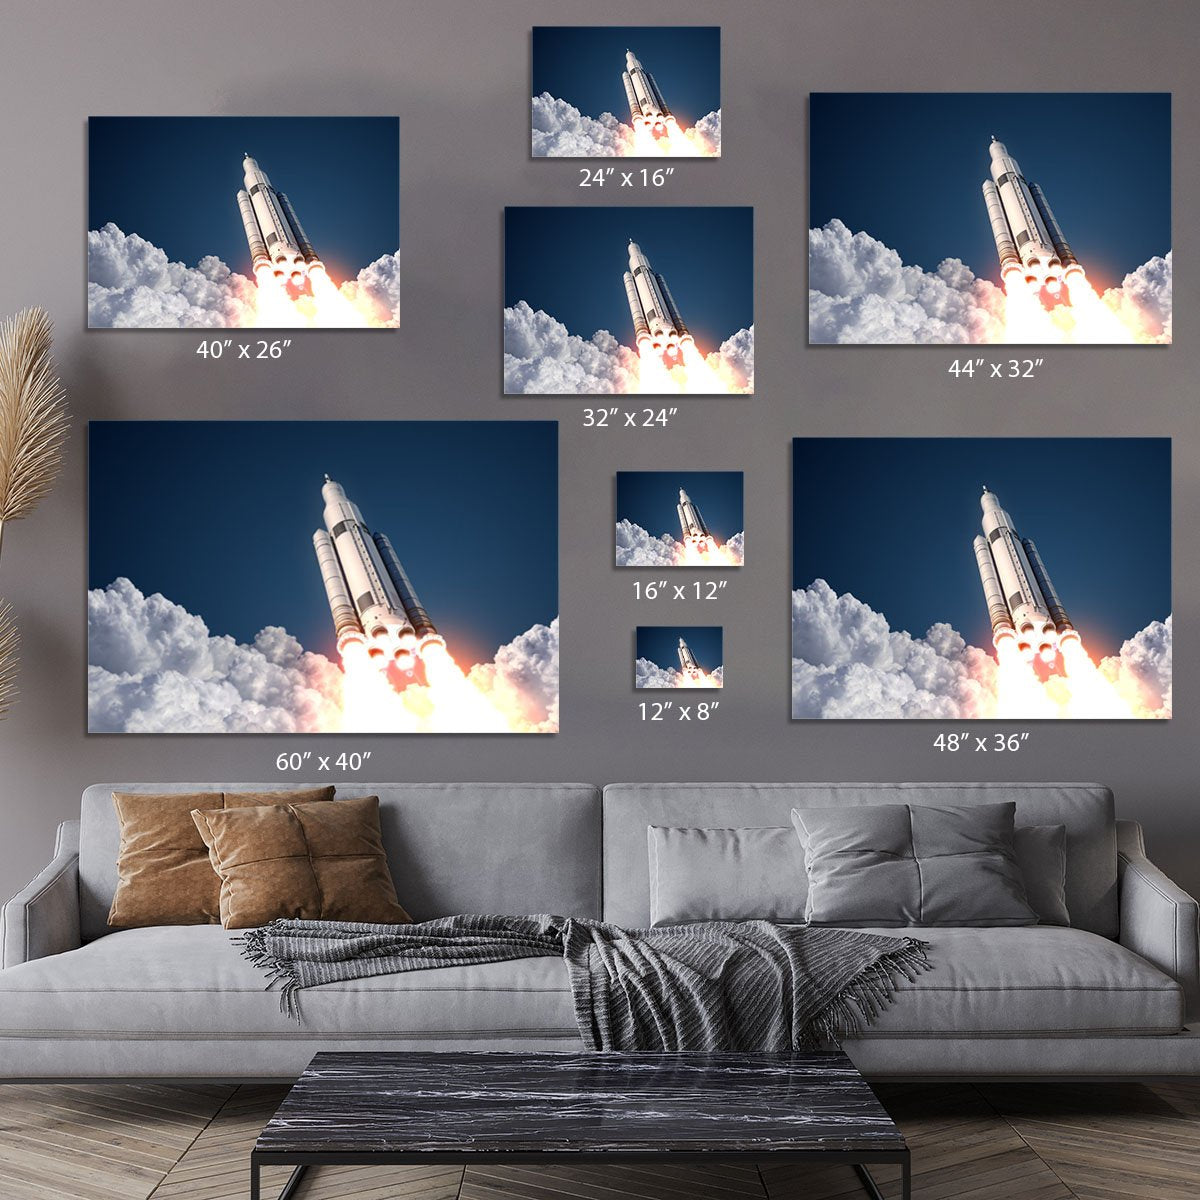 Space Launch System Takes Off Canvas Print or Poster